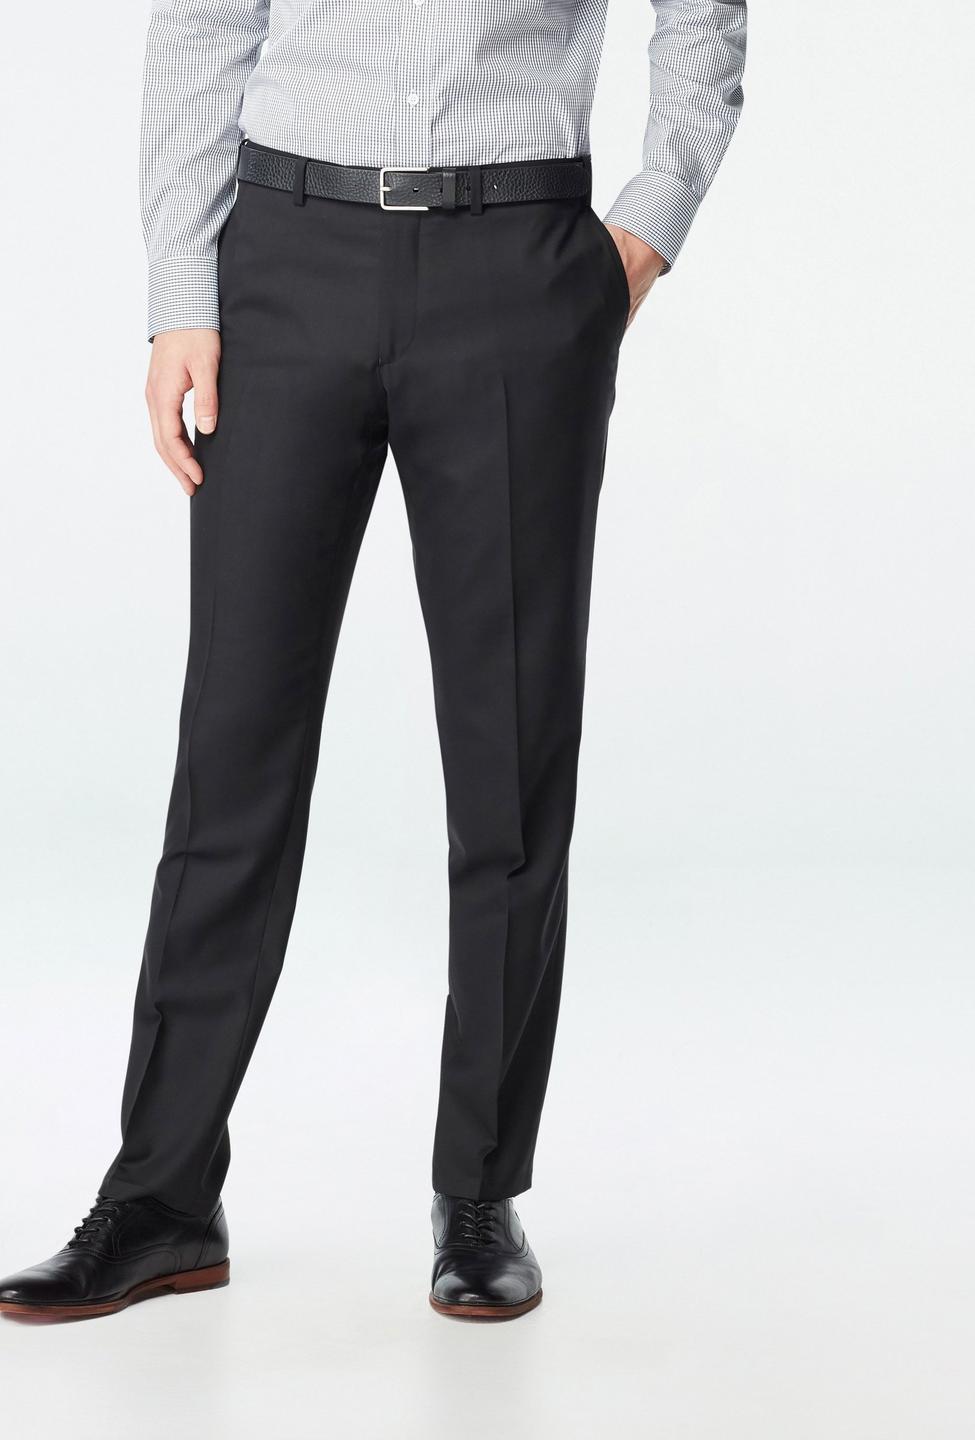 Black pants - Highbridge Solid Design from Luxury Indochino Collection